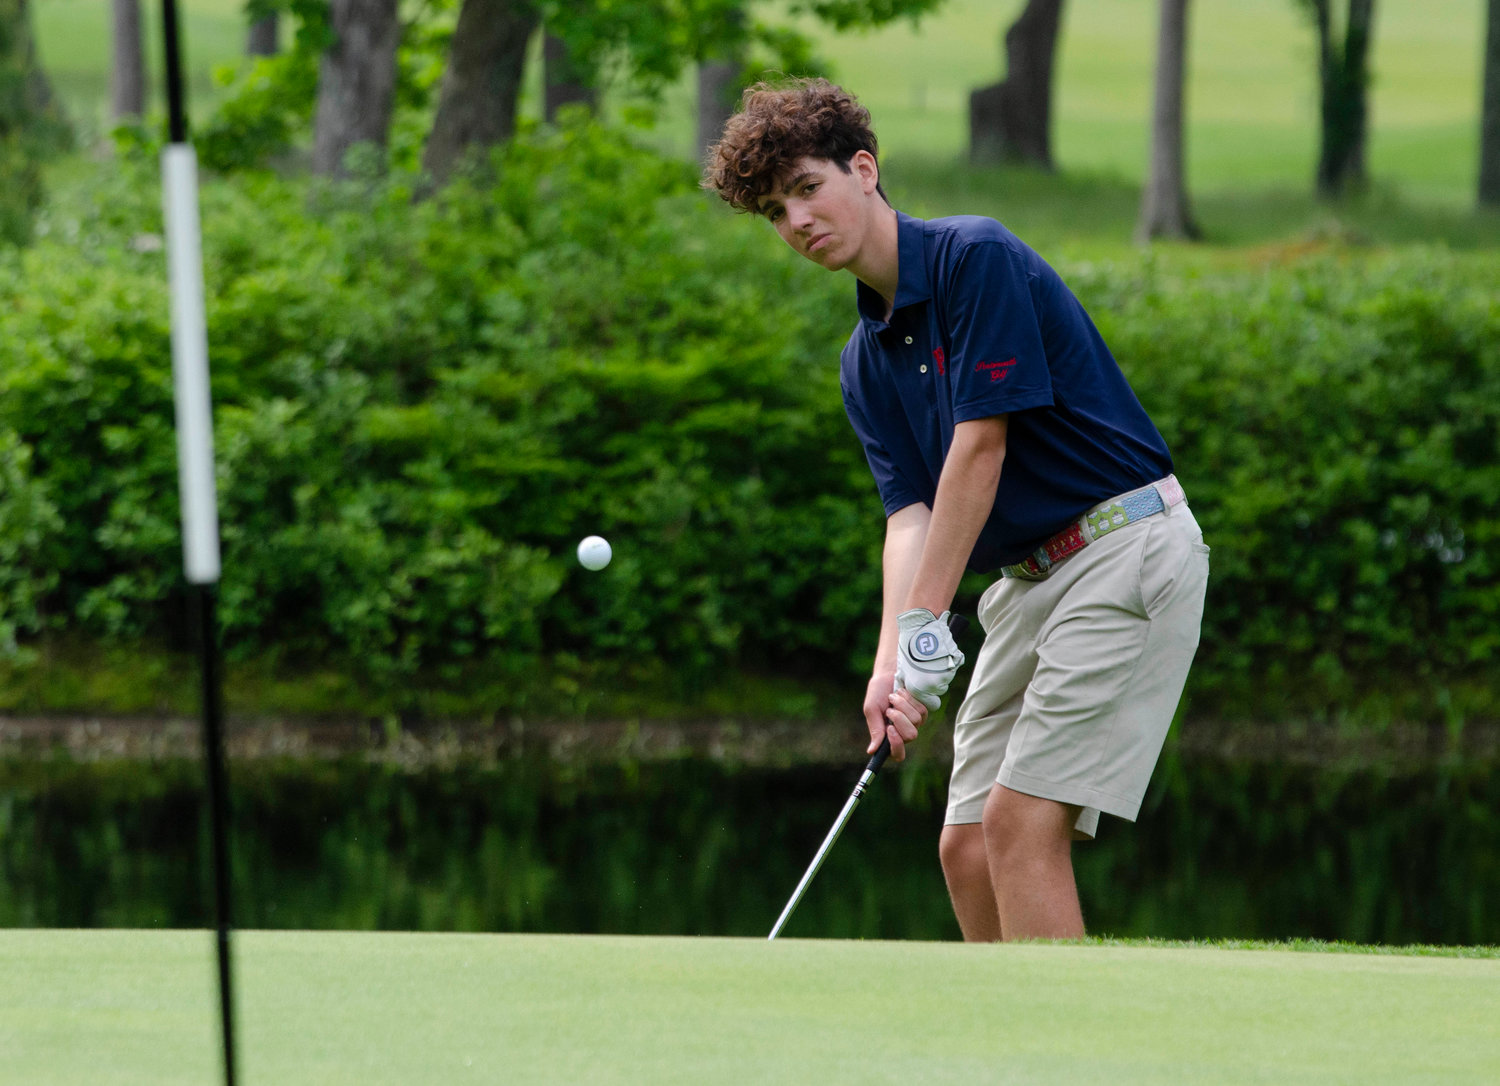 Portsmouth High’s Ronan Caufield chips onto the green while playing the back nine during the state team championships at Cranston Country Club earlier this week.